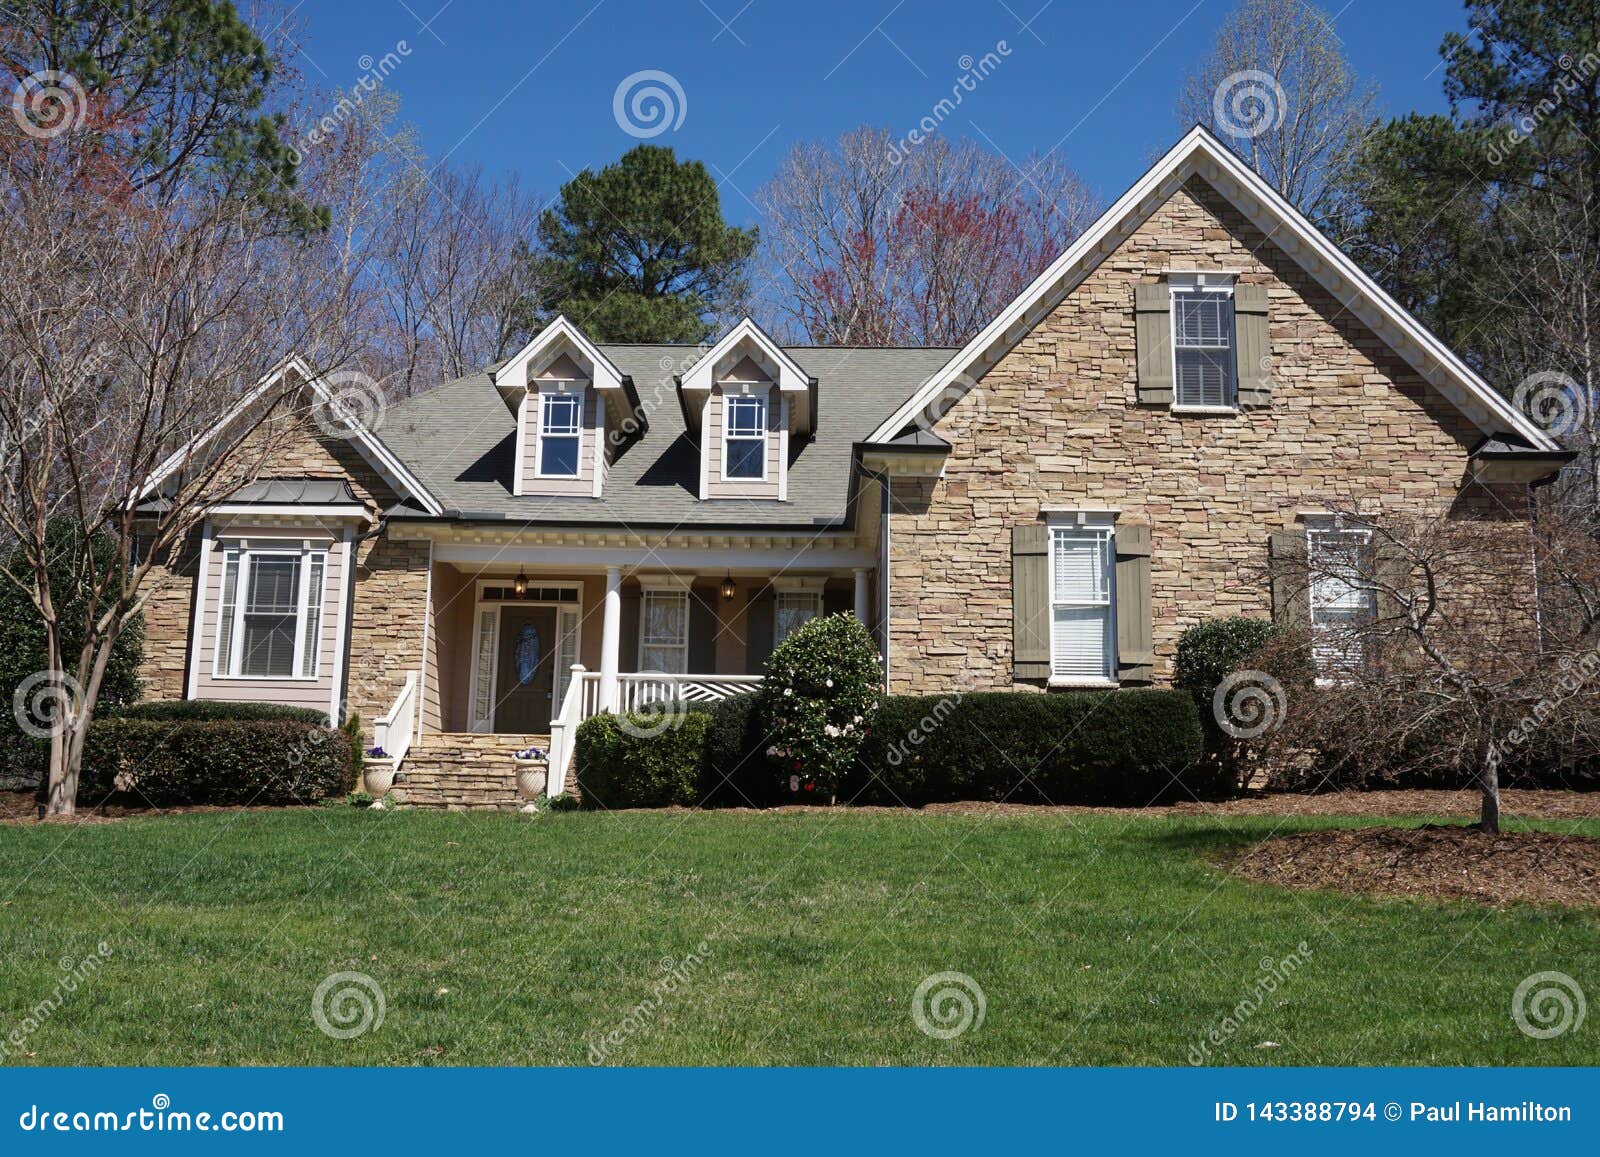 suburban house with stone exterior in an affluent neighborhood